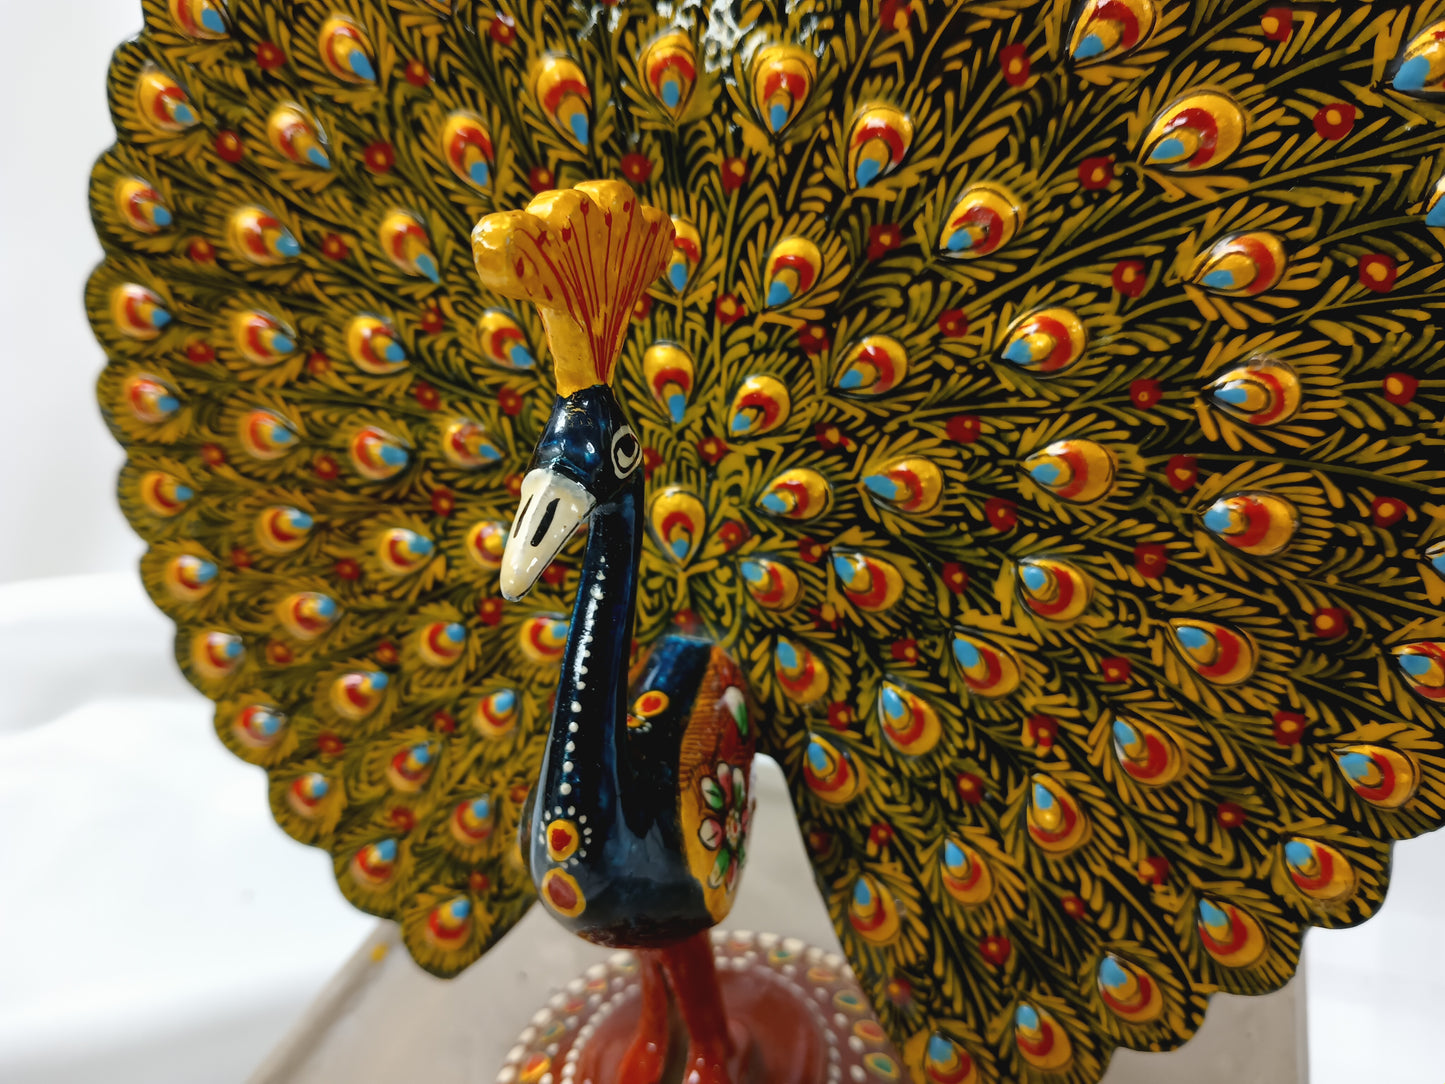 Enameled Peacock Statue 7"x4"x2.5"